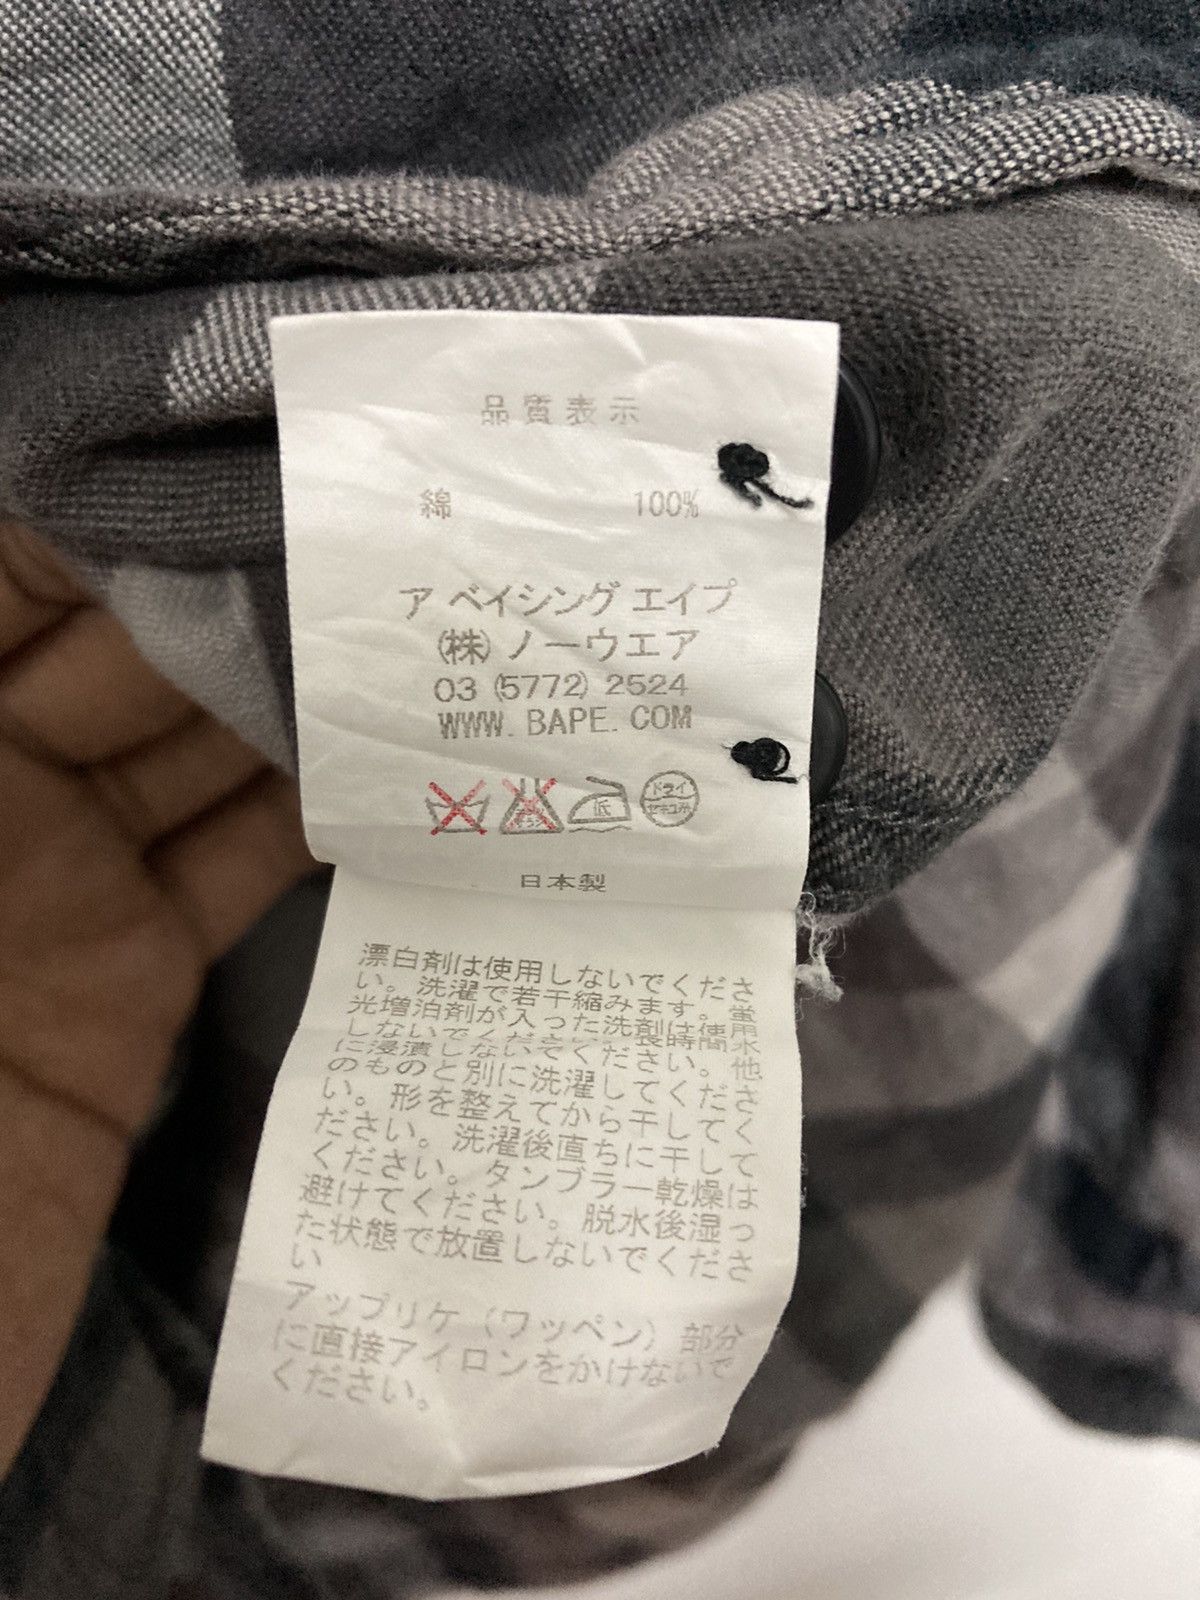 Bape Button Up Checker Flannel Shirt Made in Japan - 14